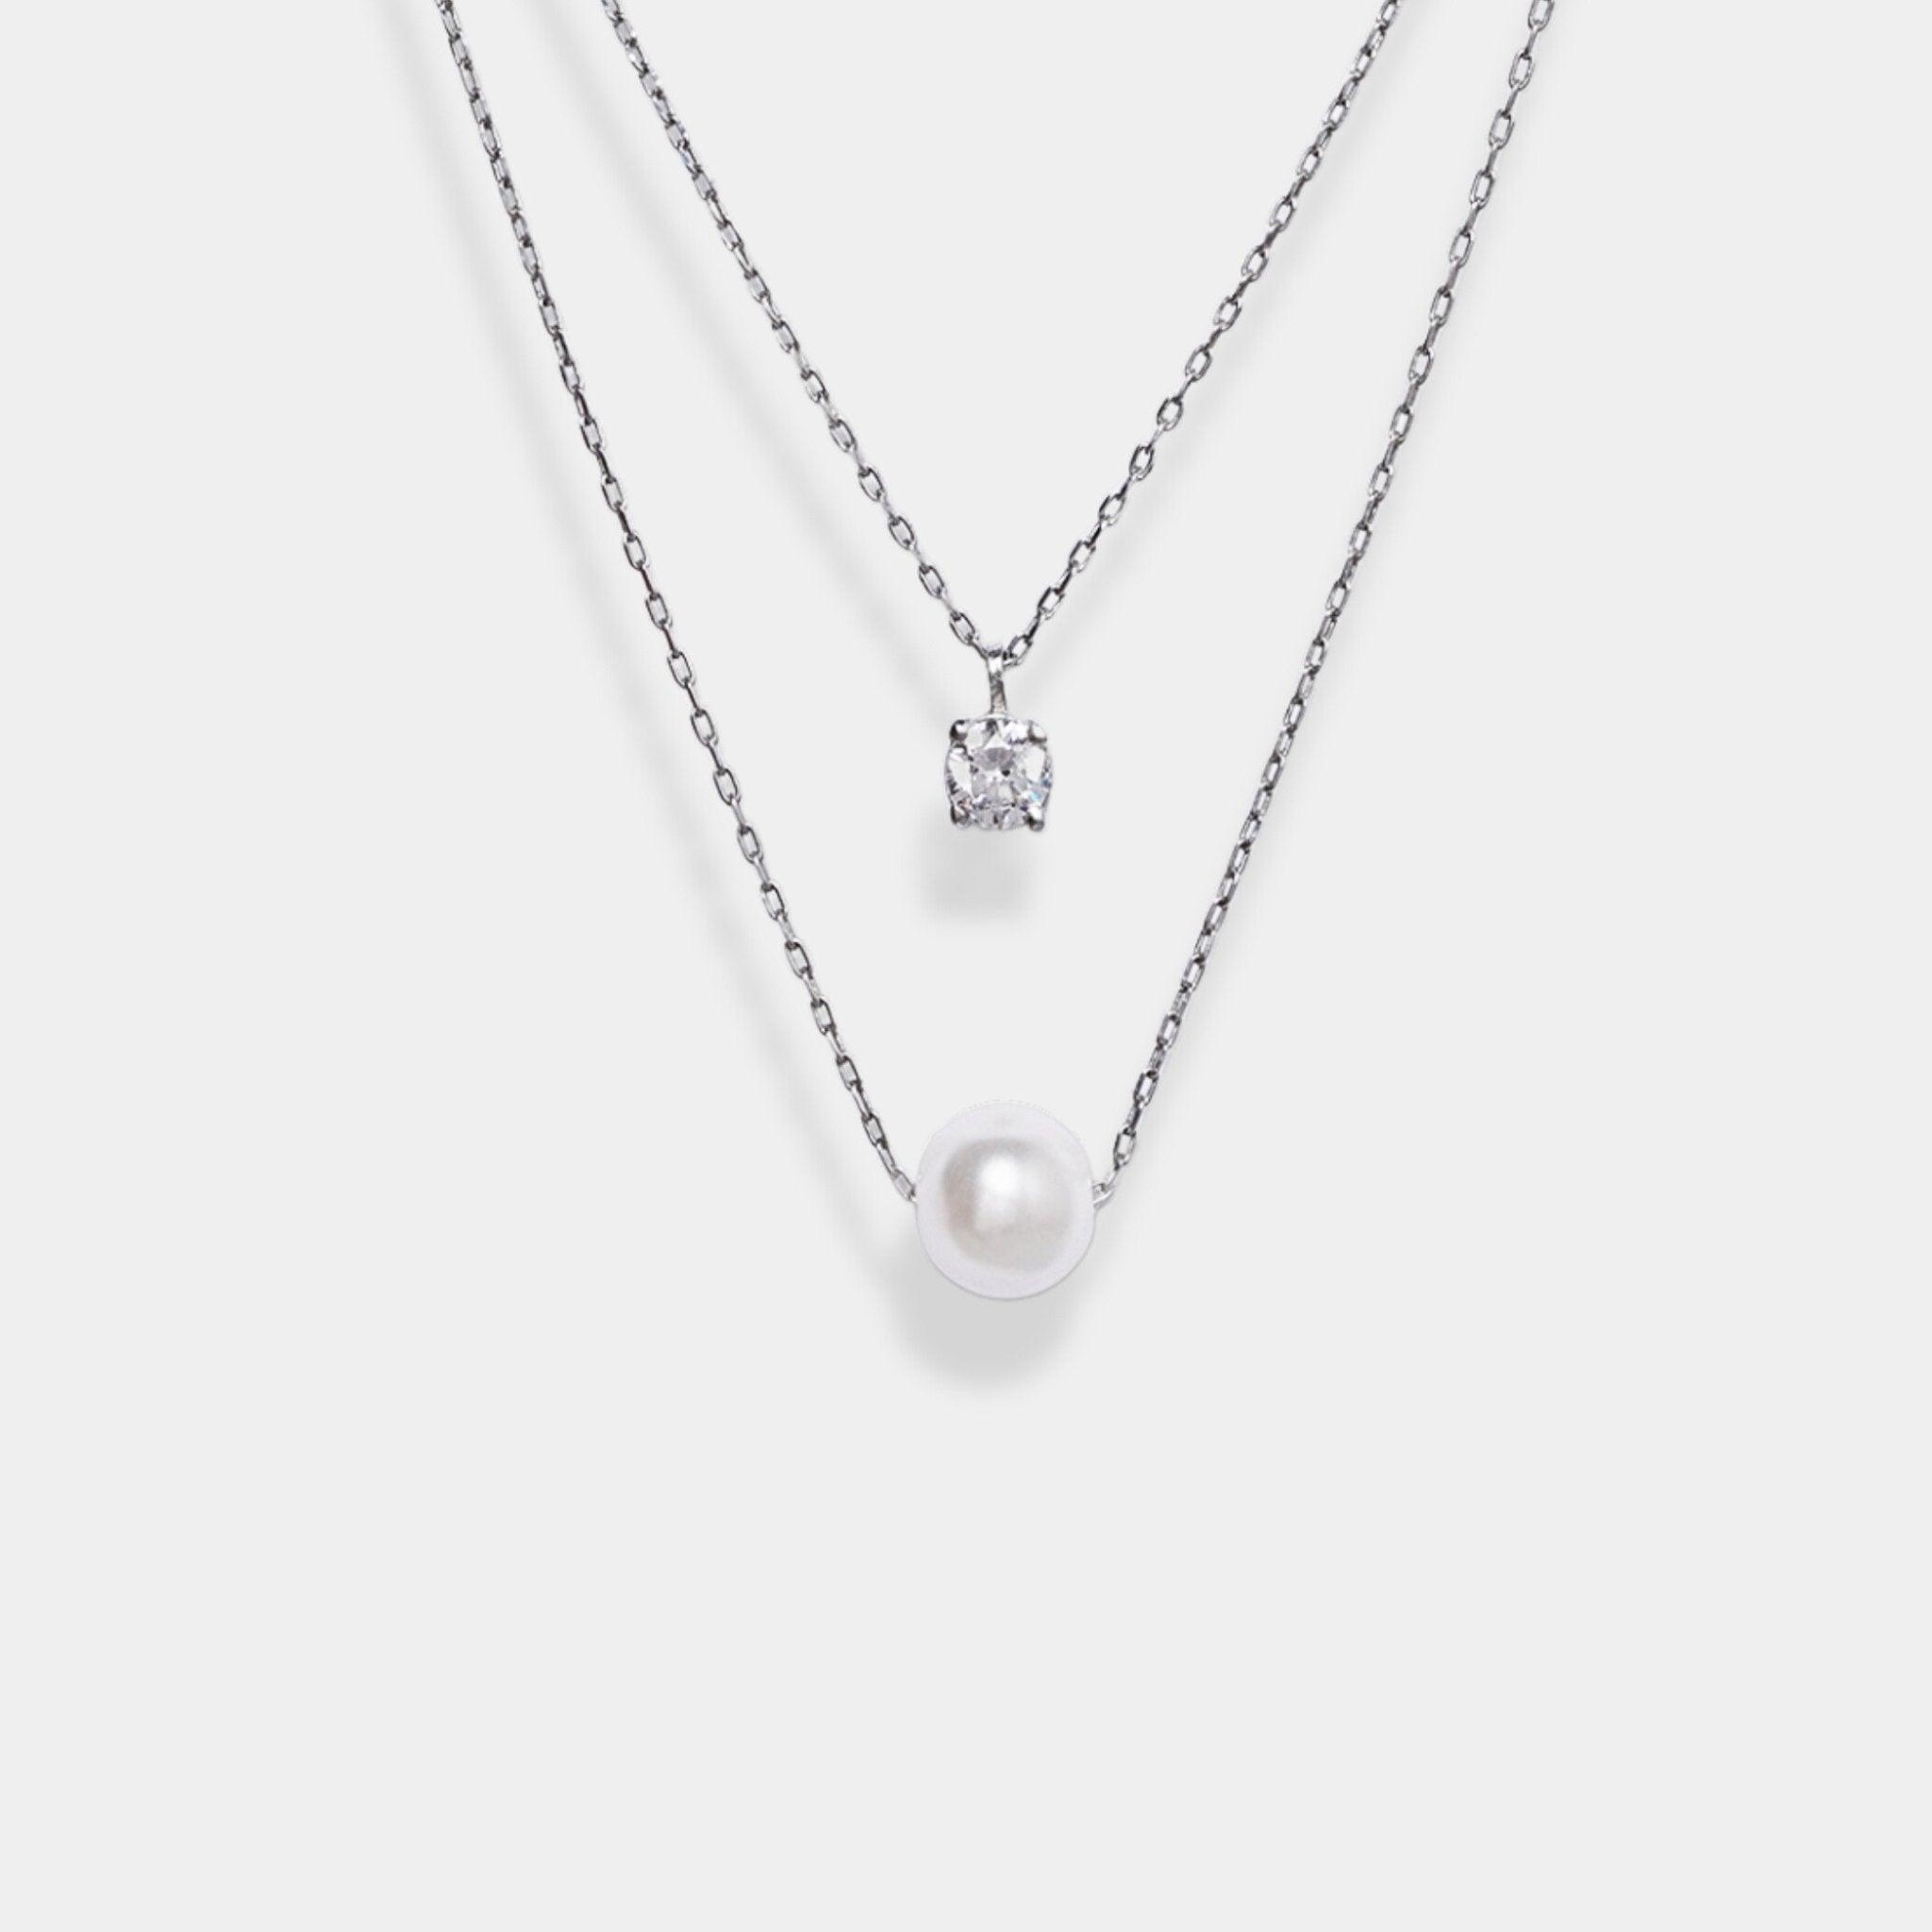 Elevate your style with our exquisite sterling silver necklace featuring a captivating circle pendant on a beautifully layered delicate chain